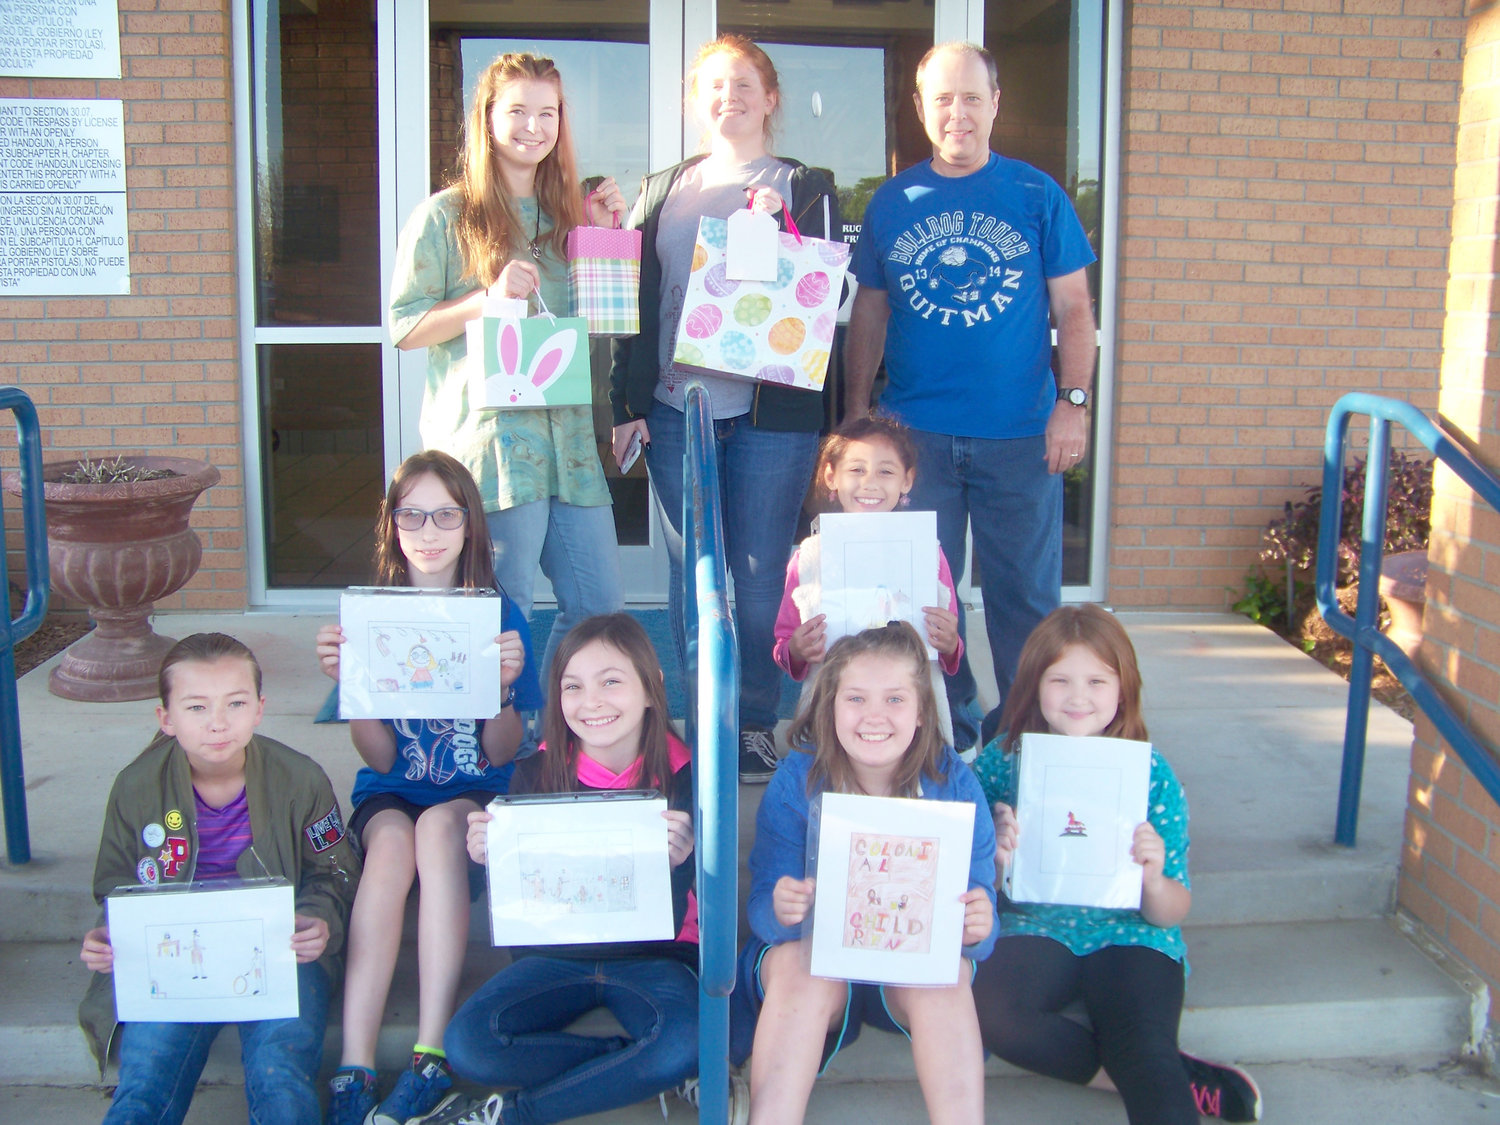 Quitman Elementary School students competed in a U. S. Postal Stamp Design contest sponsored by the Daughters of the American Colonists. Pictured are winners (front left to right) McKenna Burks, Peyton Kruckner, Alexandra Derryberry, Ariana Jarimello, Gabby Chaney, and Layla Shelton. In the back are members of the QHS Anchor Club who presented gifts. From left, they are Elizabethe Turner and Ashley Alexander. They are pictured with fourth grade social studies teacher, Kevin Clevenger.